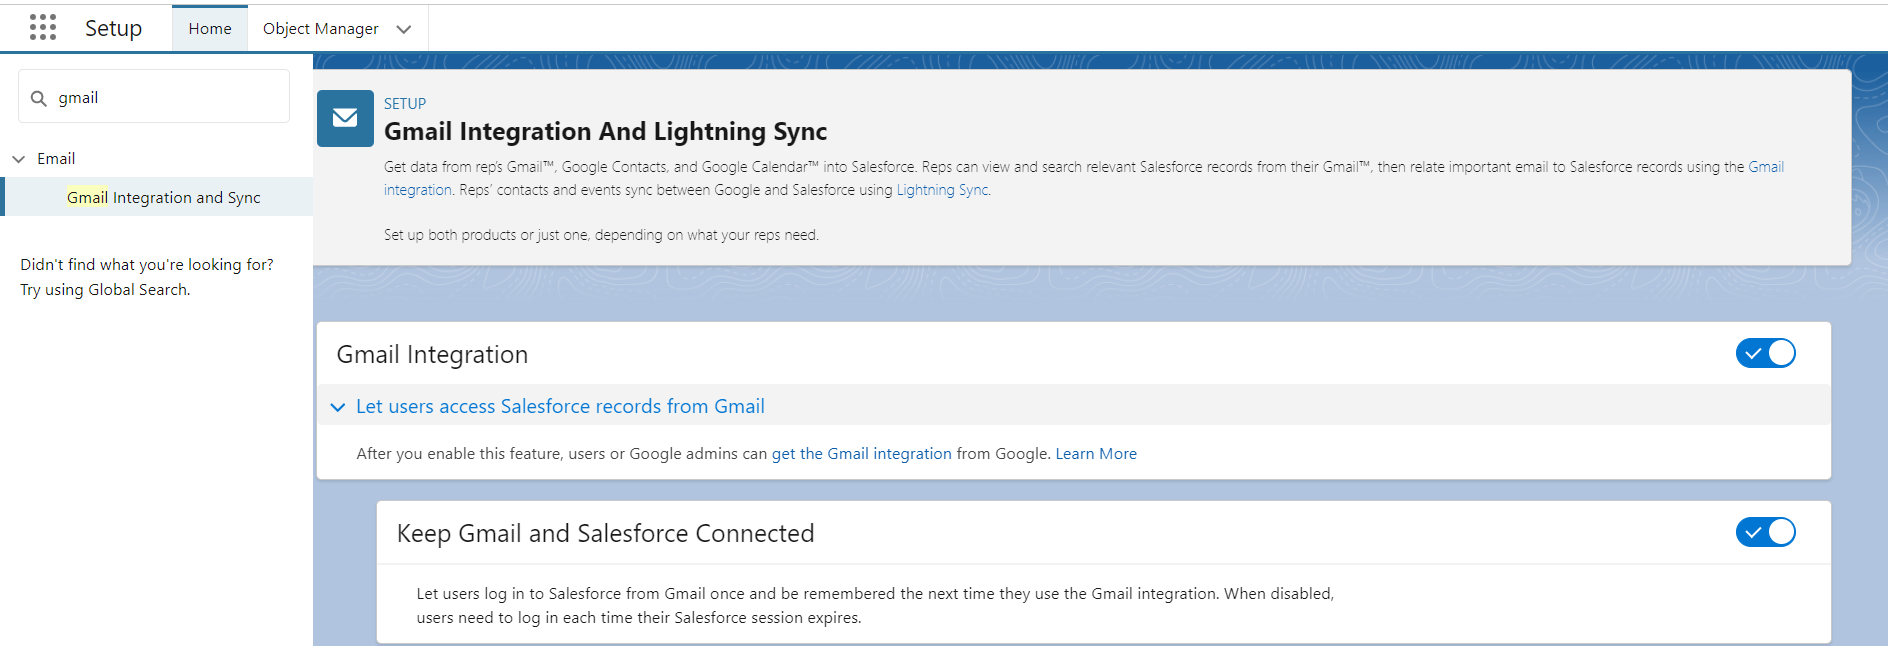 Gmail Integration and Sync